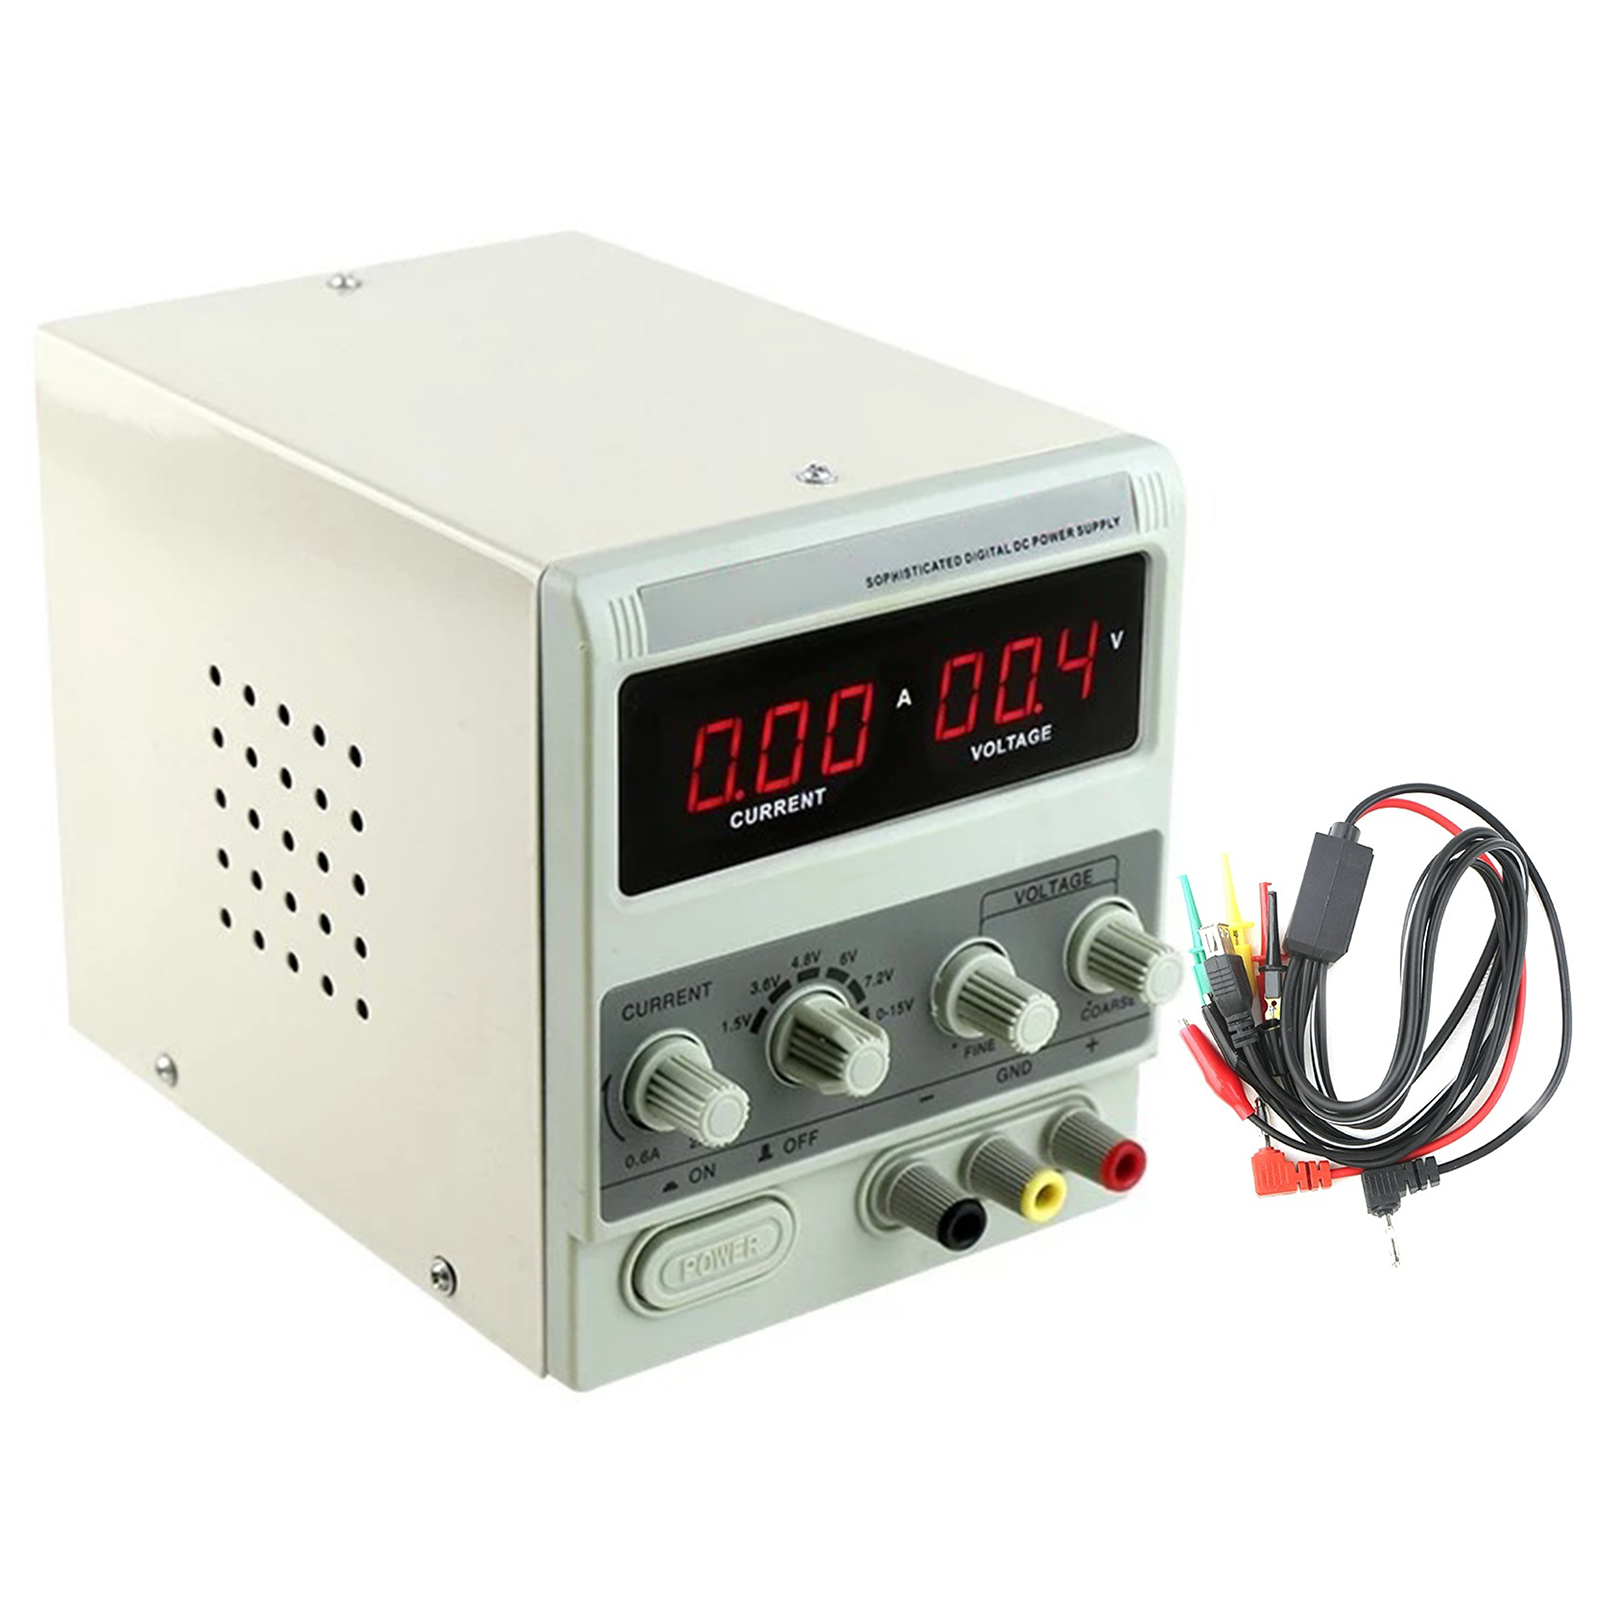 BK-1502DD DC Power Supply Variable 15V 2A Digital Display Adjustable Switching Regulated Power Supply for Mobile Phone Laptop Repair